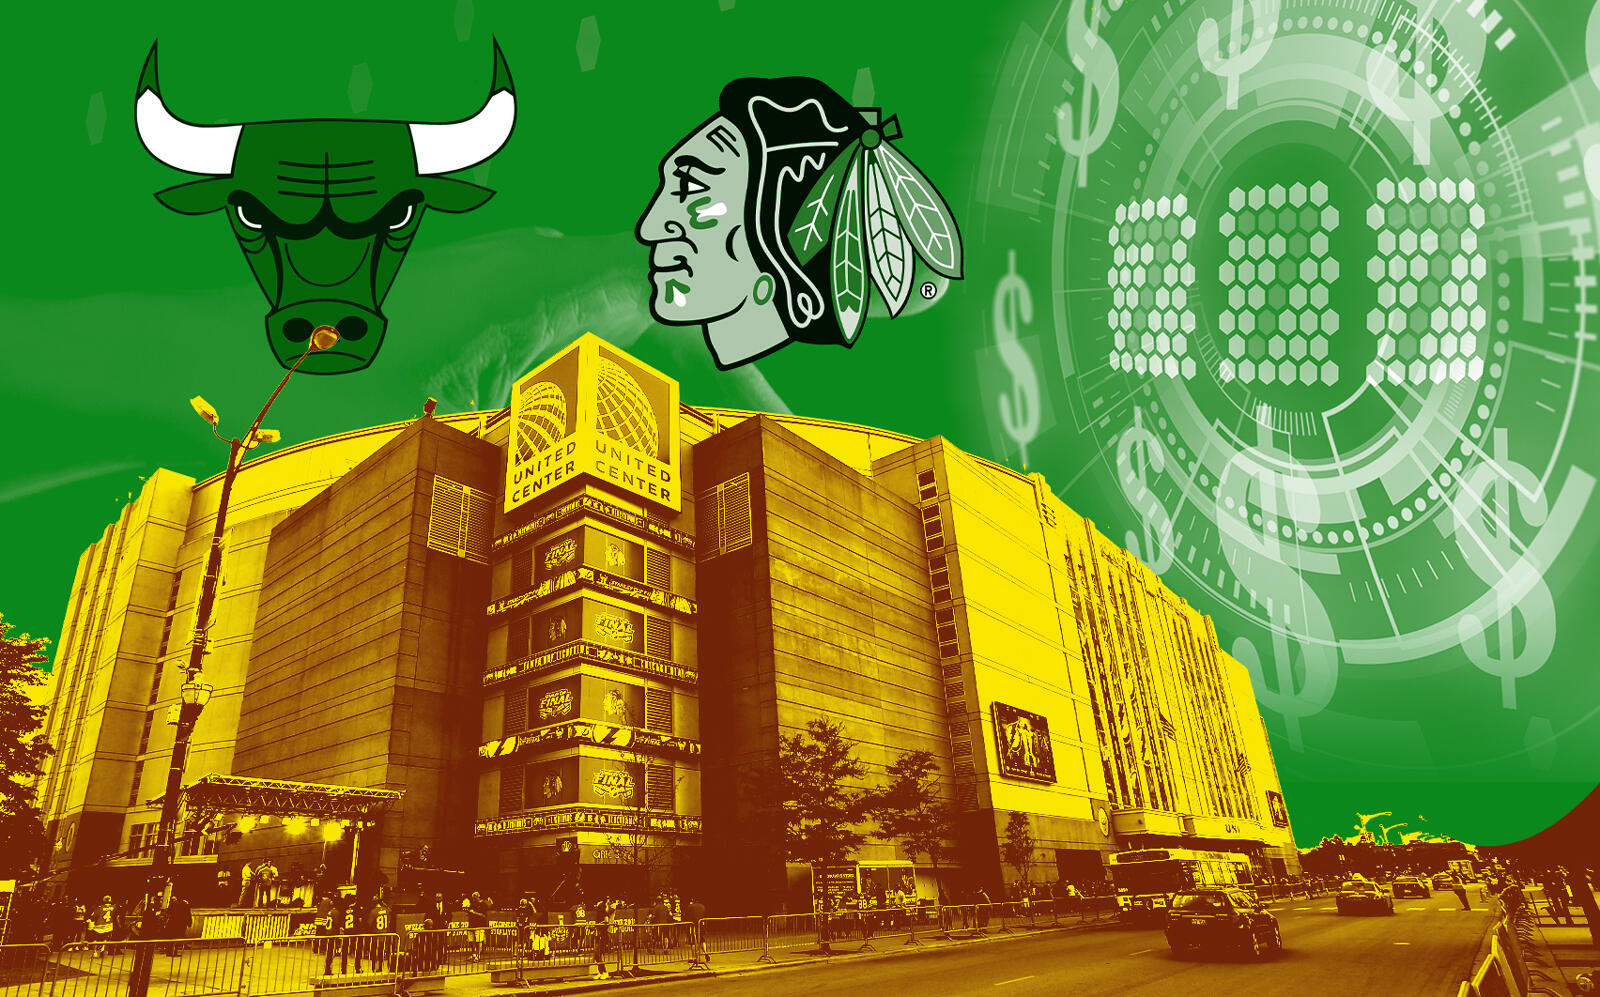 The United Center is partnering with FanDuel to open a sportsbook lounge  inside the home of the Chicago Bulls and Blackhawks